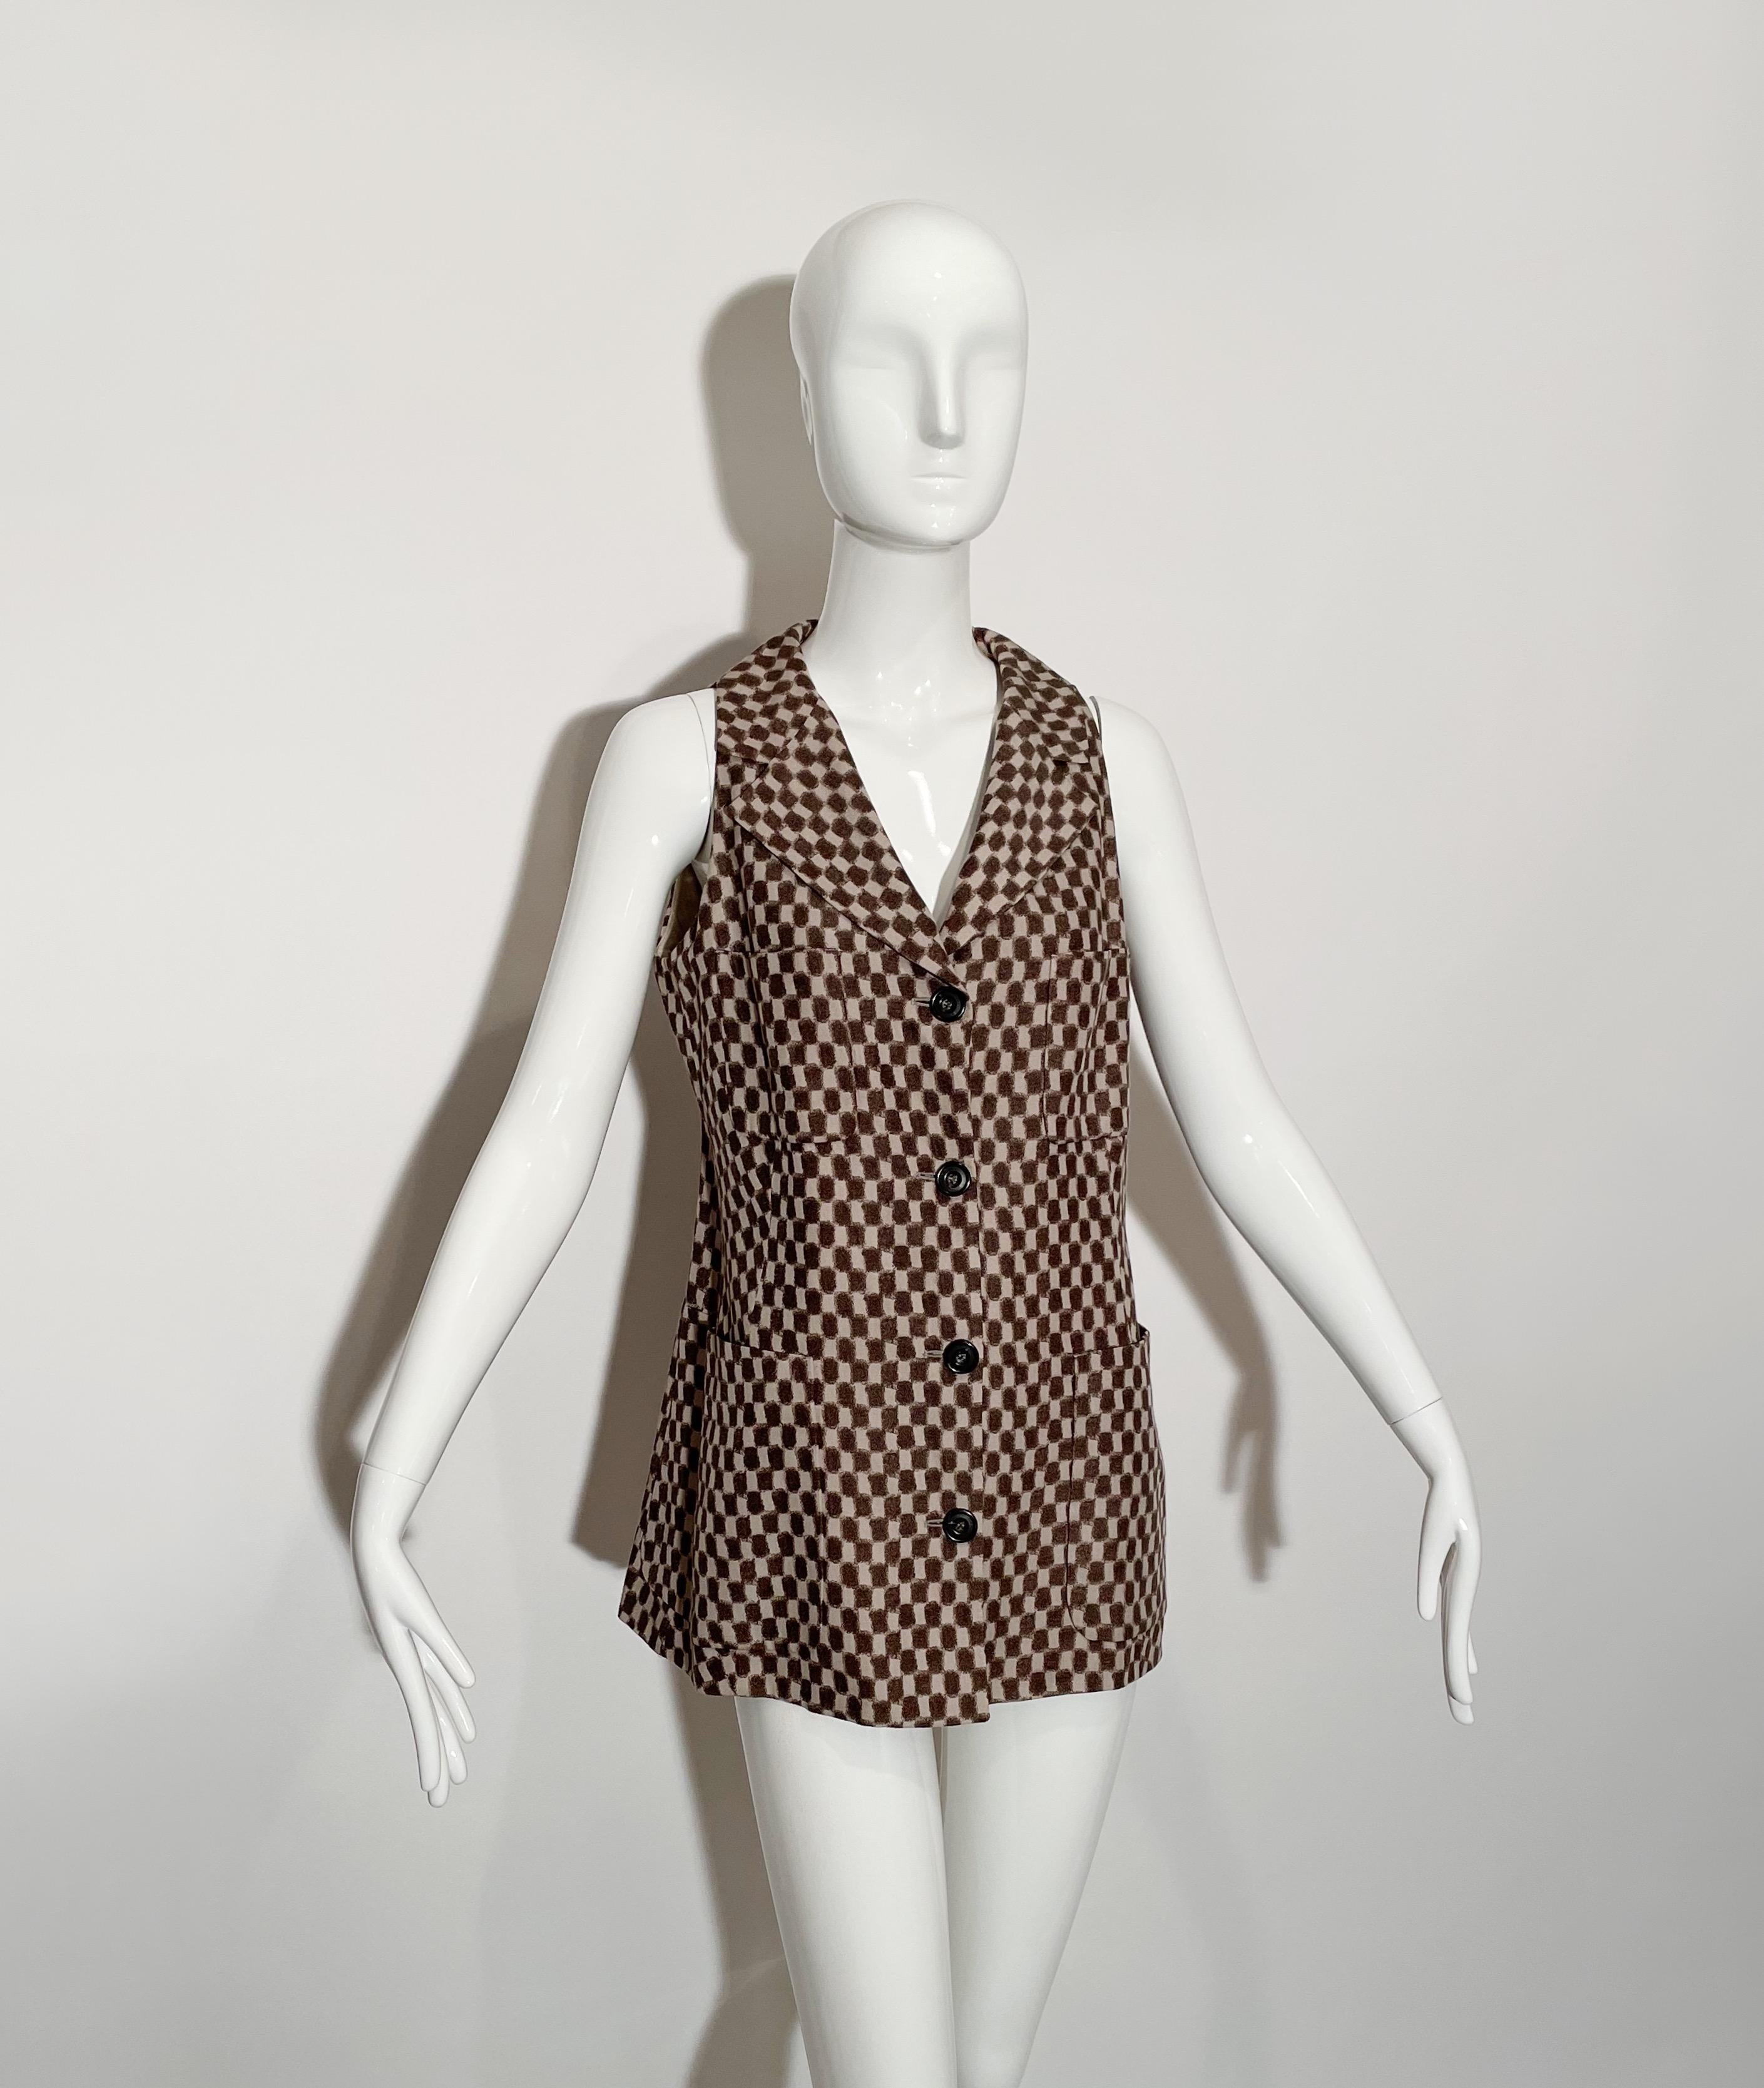 Brown and tan checkered vest. Lapel collar. Front button closures.  Pockets at chest and waist. Lined. Viscose. Made in Italy.

*Condition: excellent vintage condition. No visible flaws.


Measurements Taken Laying Flat (inches)—

Shoulder to